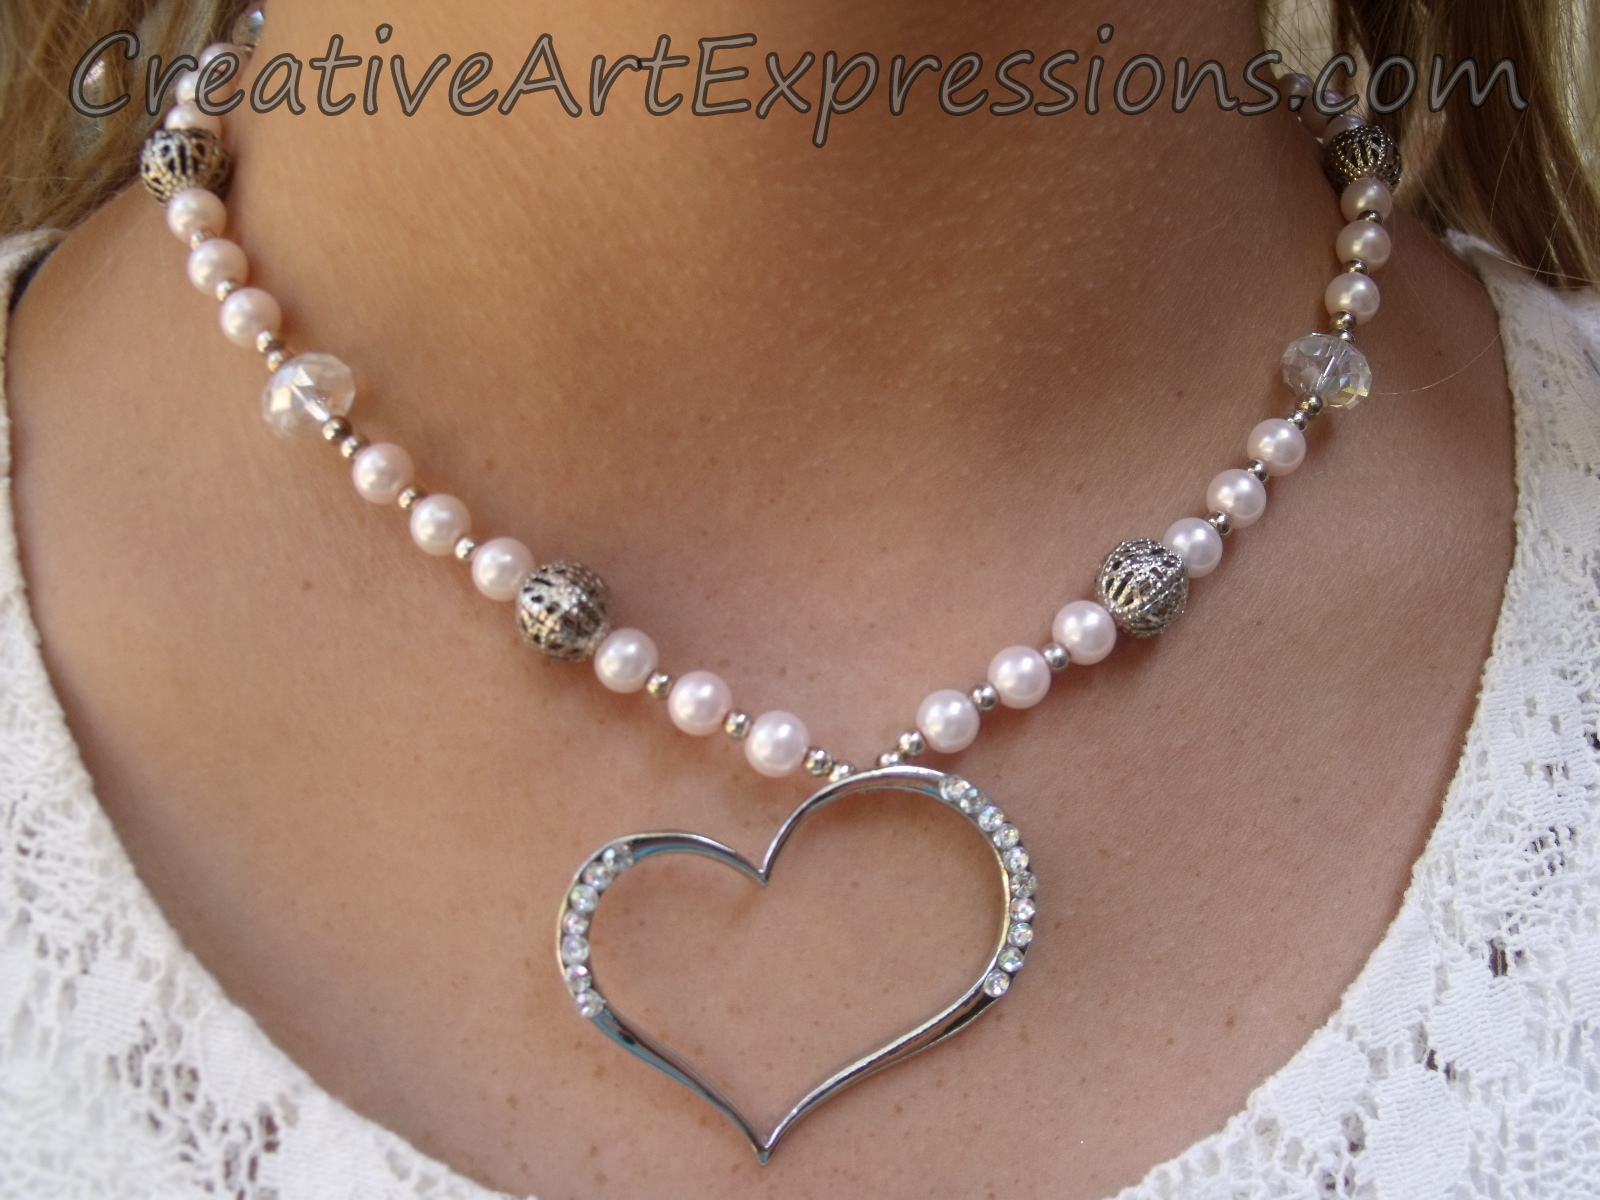 Creative Art Expressions Handmade Pink & Silver Heart Necklace Jewelry Design